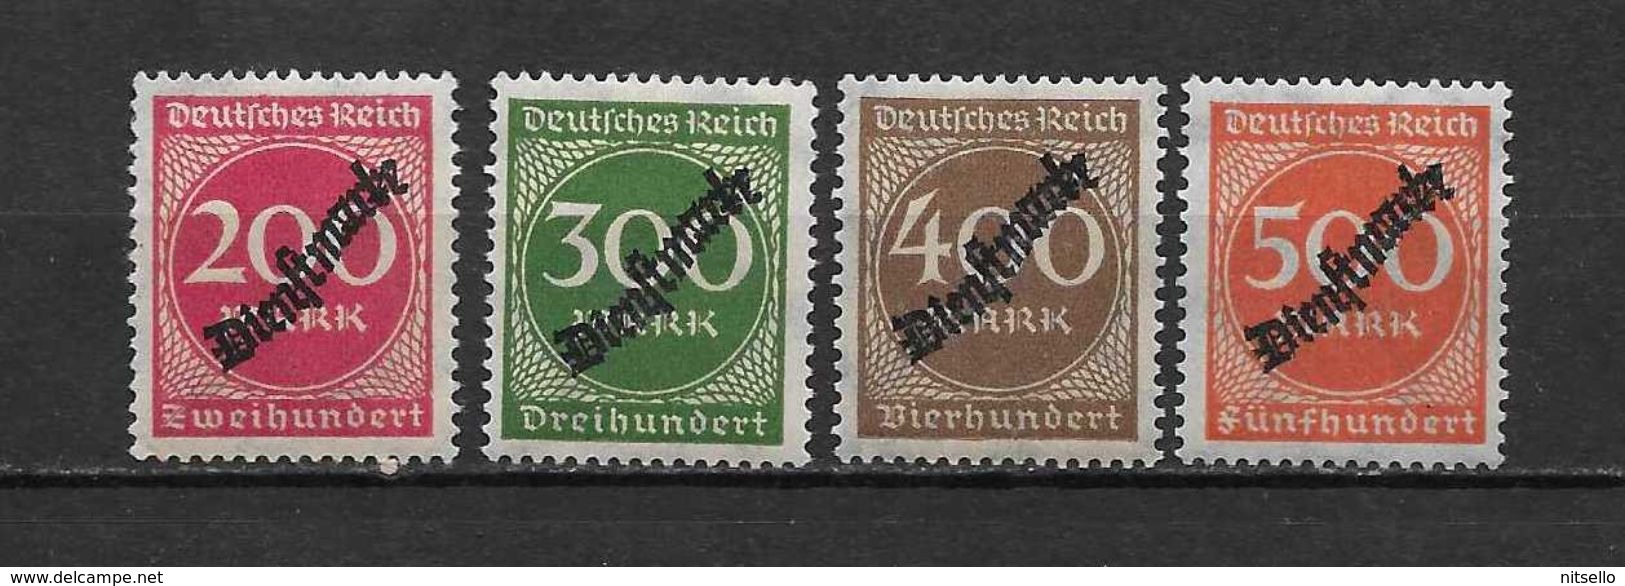 LOTE 1622  ///  ALEMANIA IMPERIO   YVERT Nº: SERVICE 51/54  **MNH - Oficial